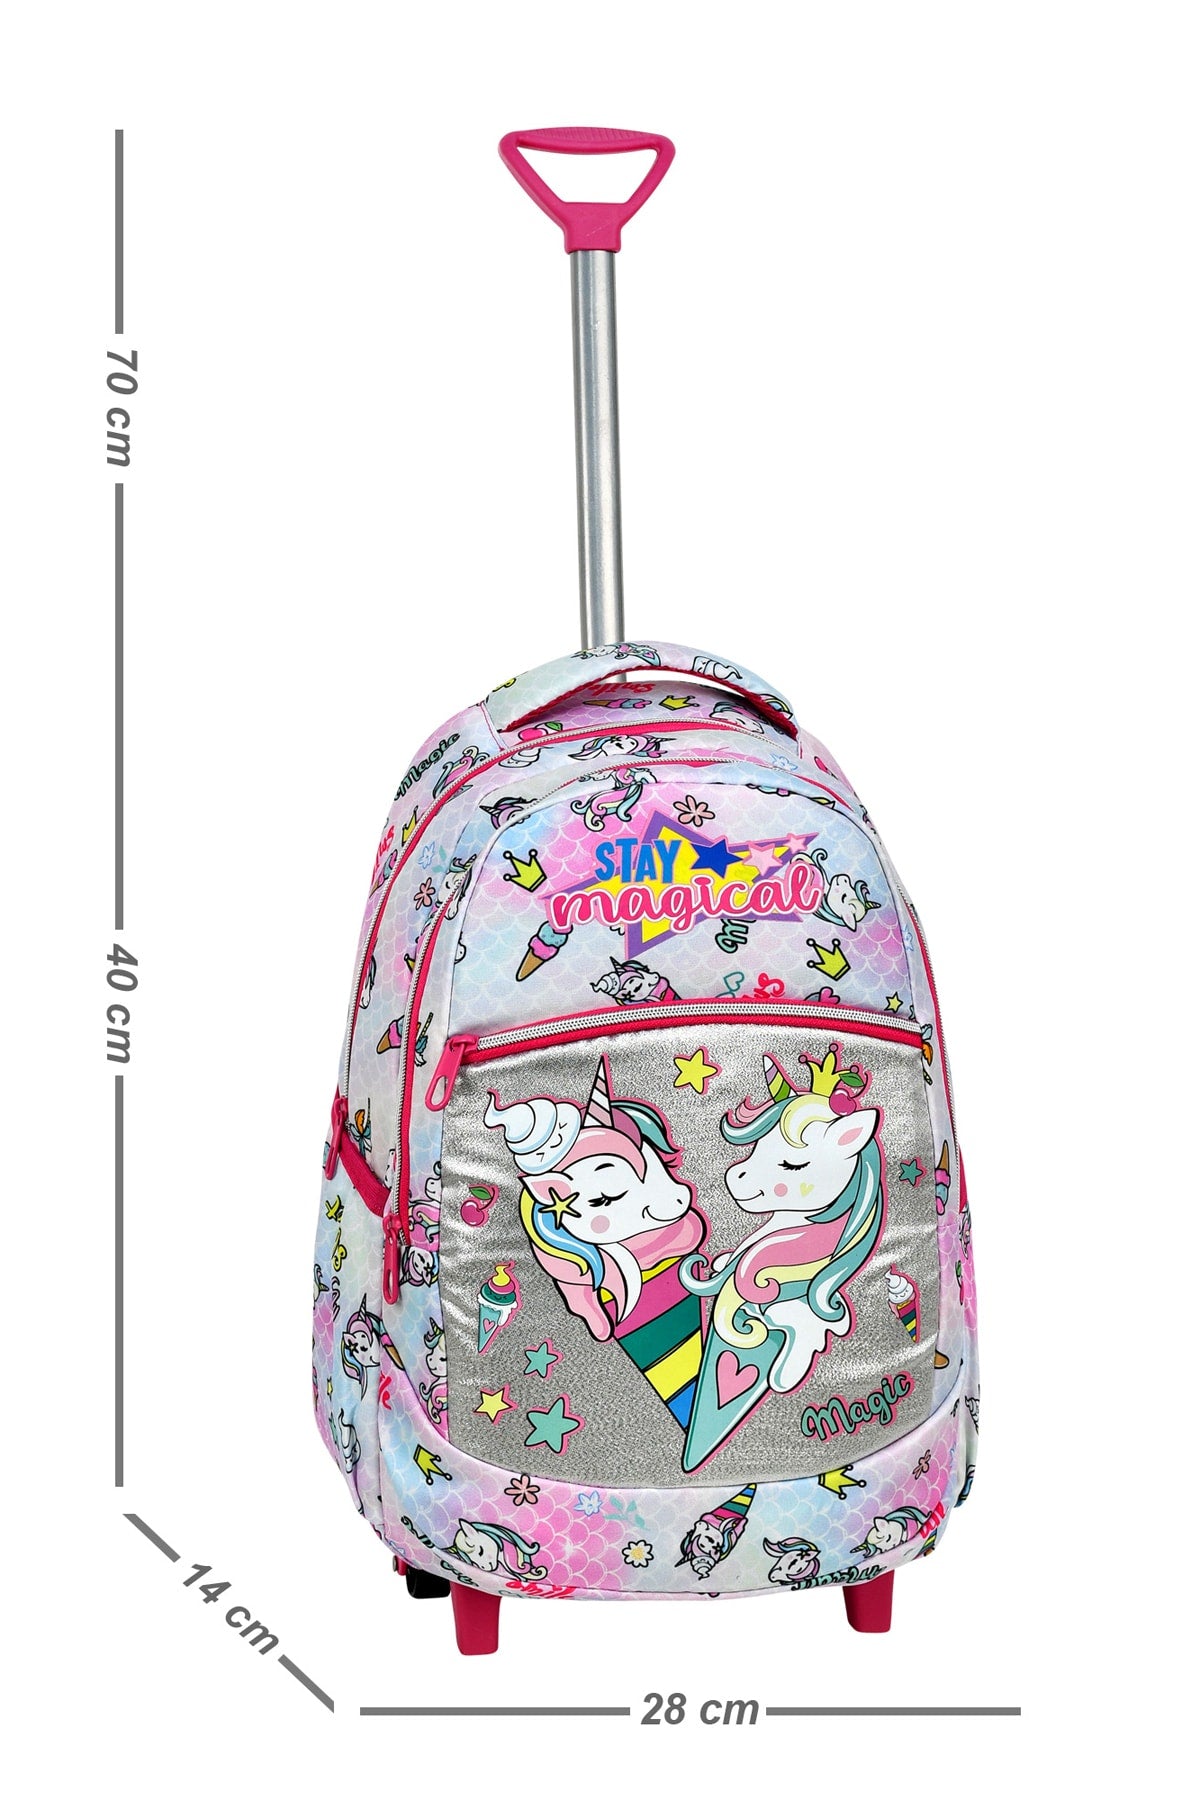 Blue Unicorn Pattern Primary School Bag + Lunch Box with Squeegee